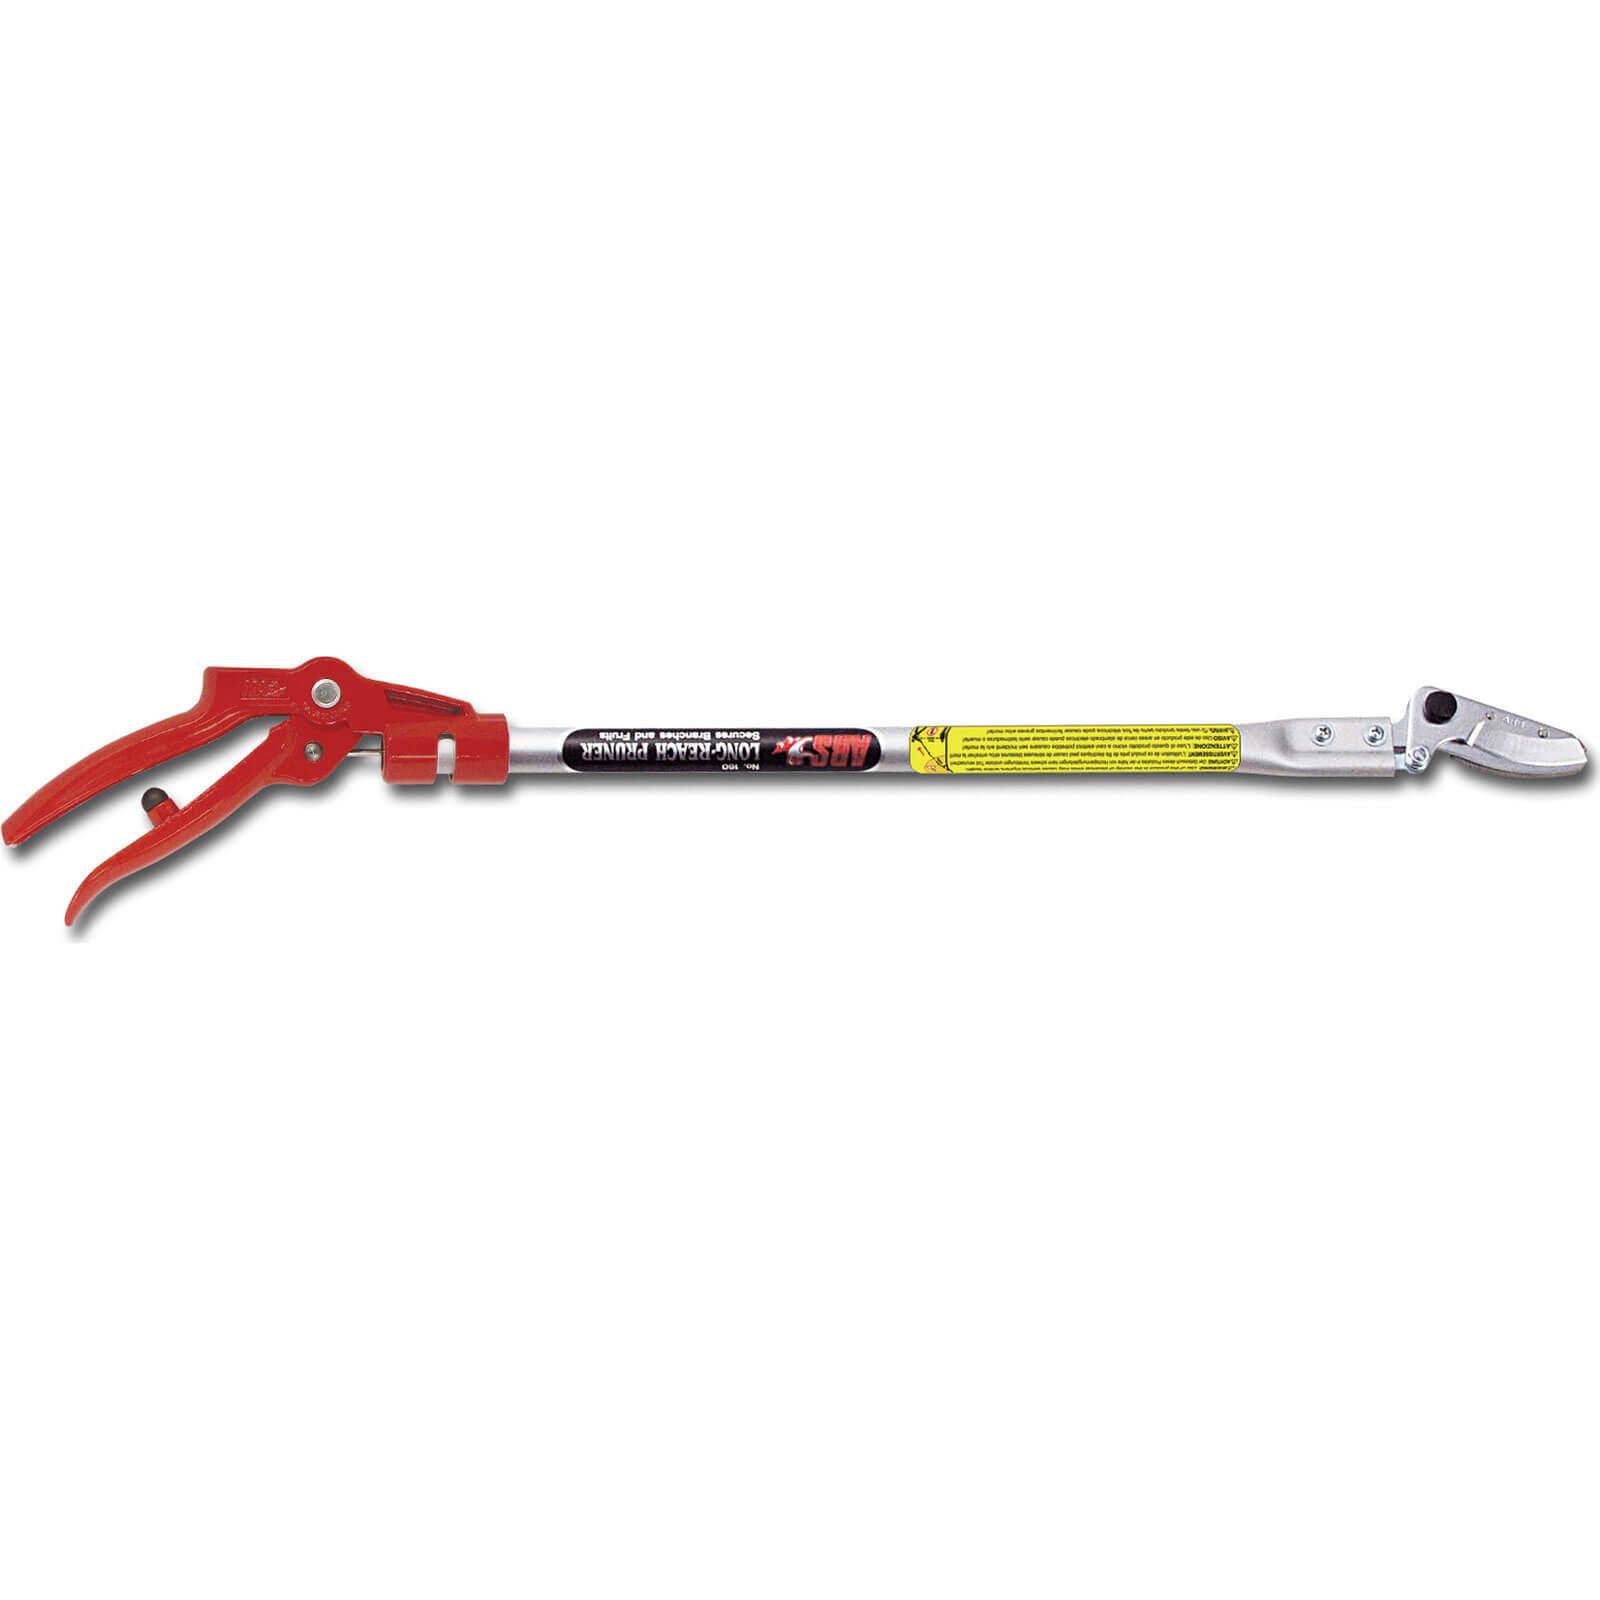 ARS 160 Long Reach Cut and Hold Pruner 0.6m